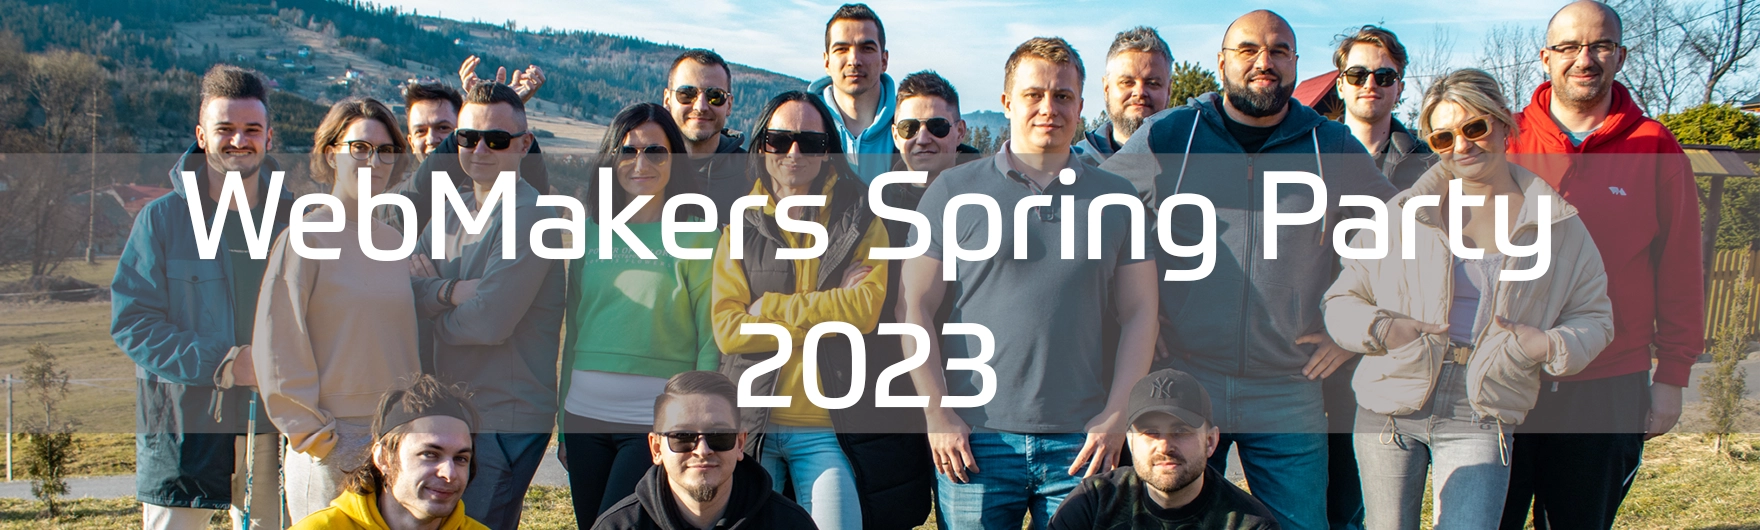 WebMakers Spring Party 2023